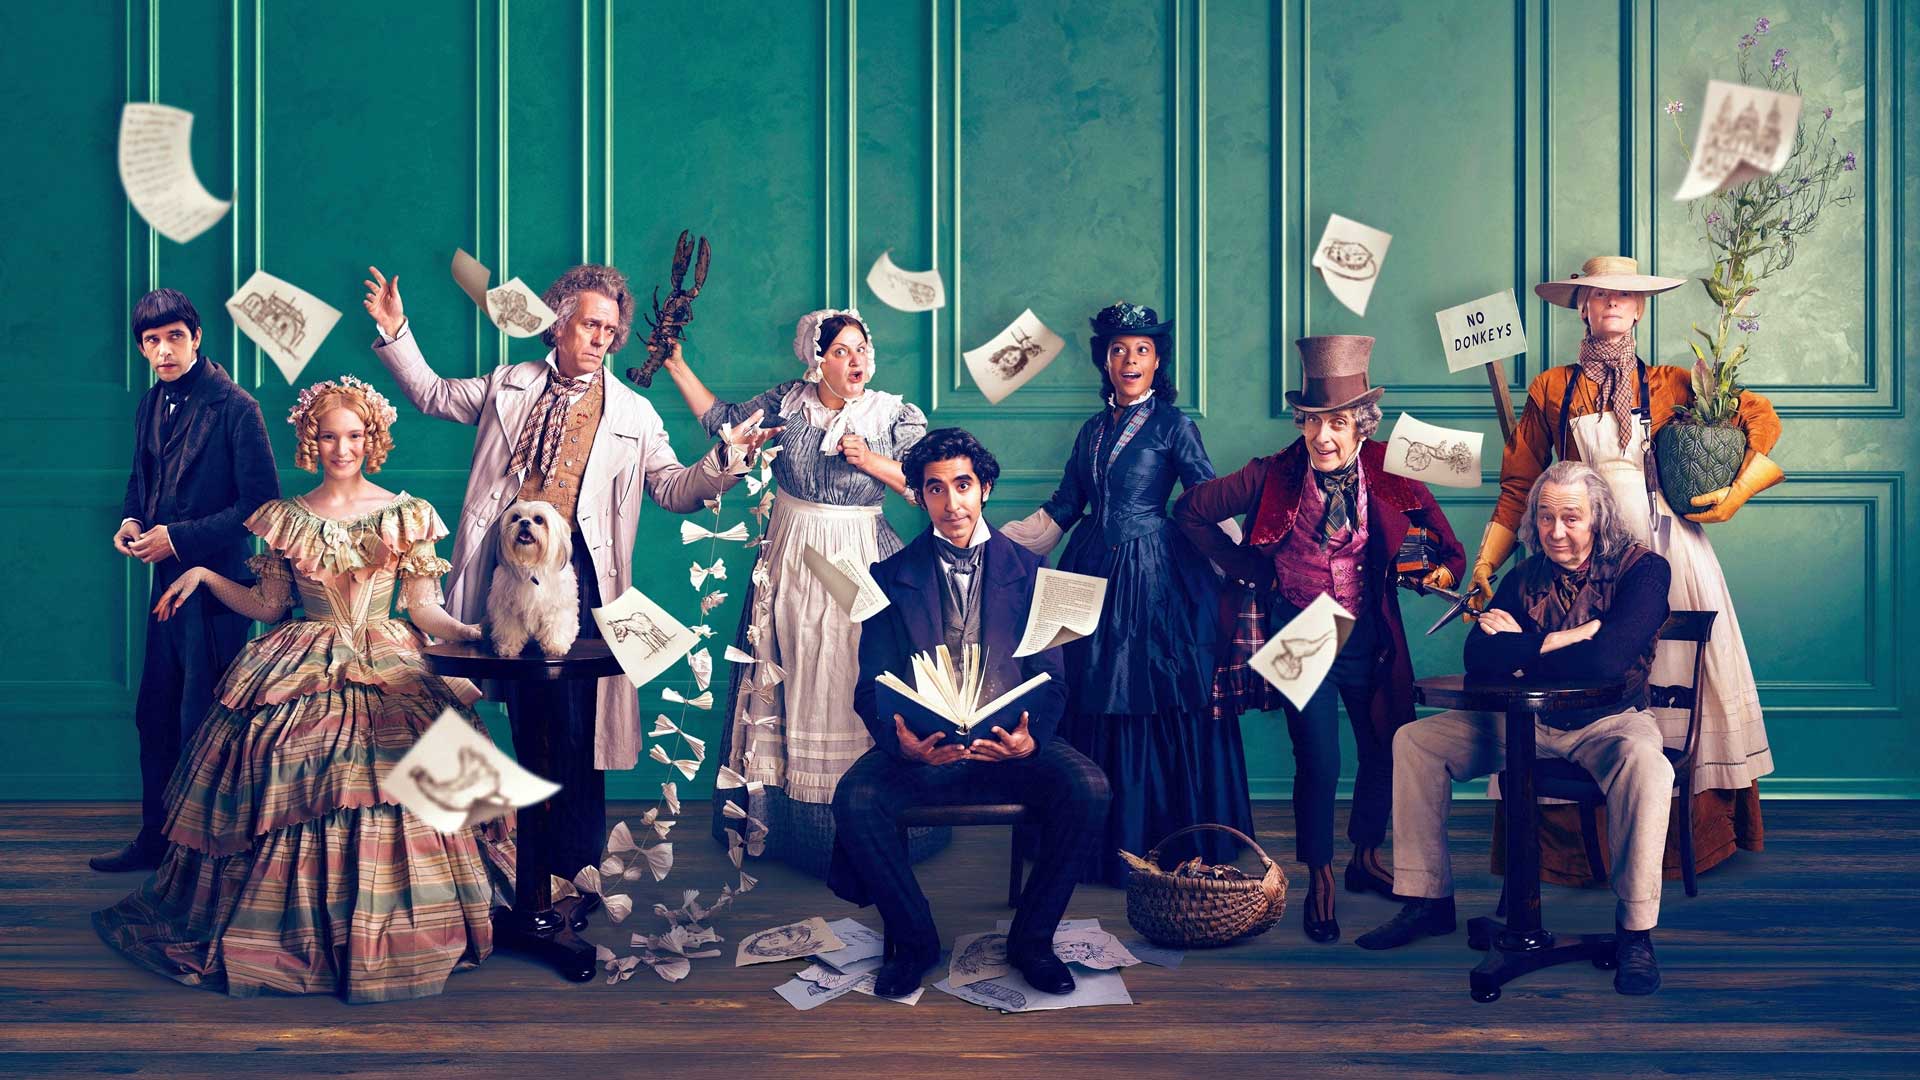 Charming ‘The Personal History of David Copperfield’ Breathes Life into Classic Dickens Story